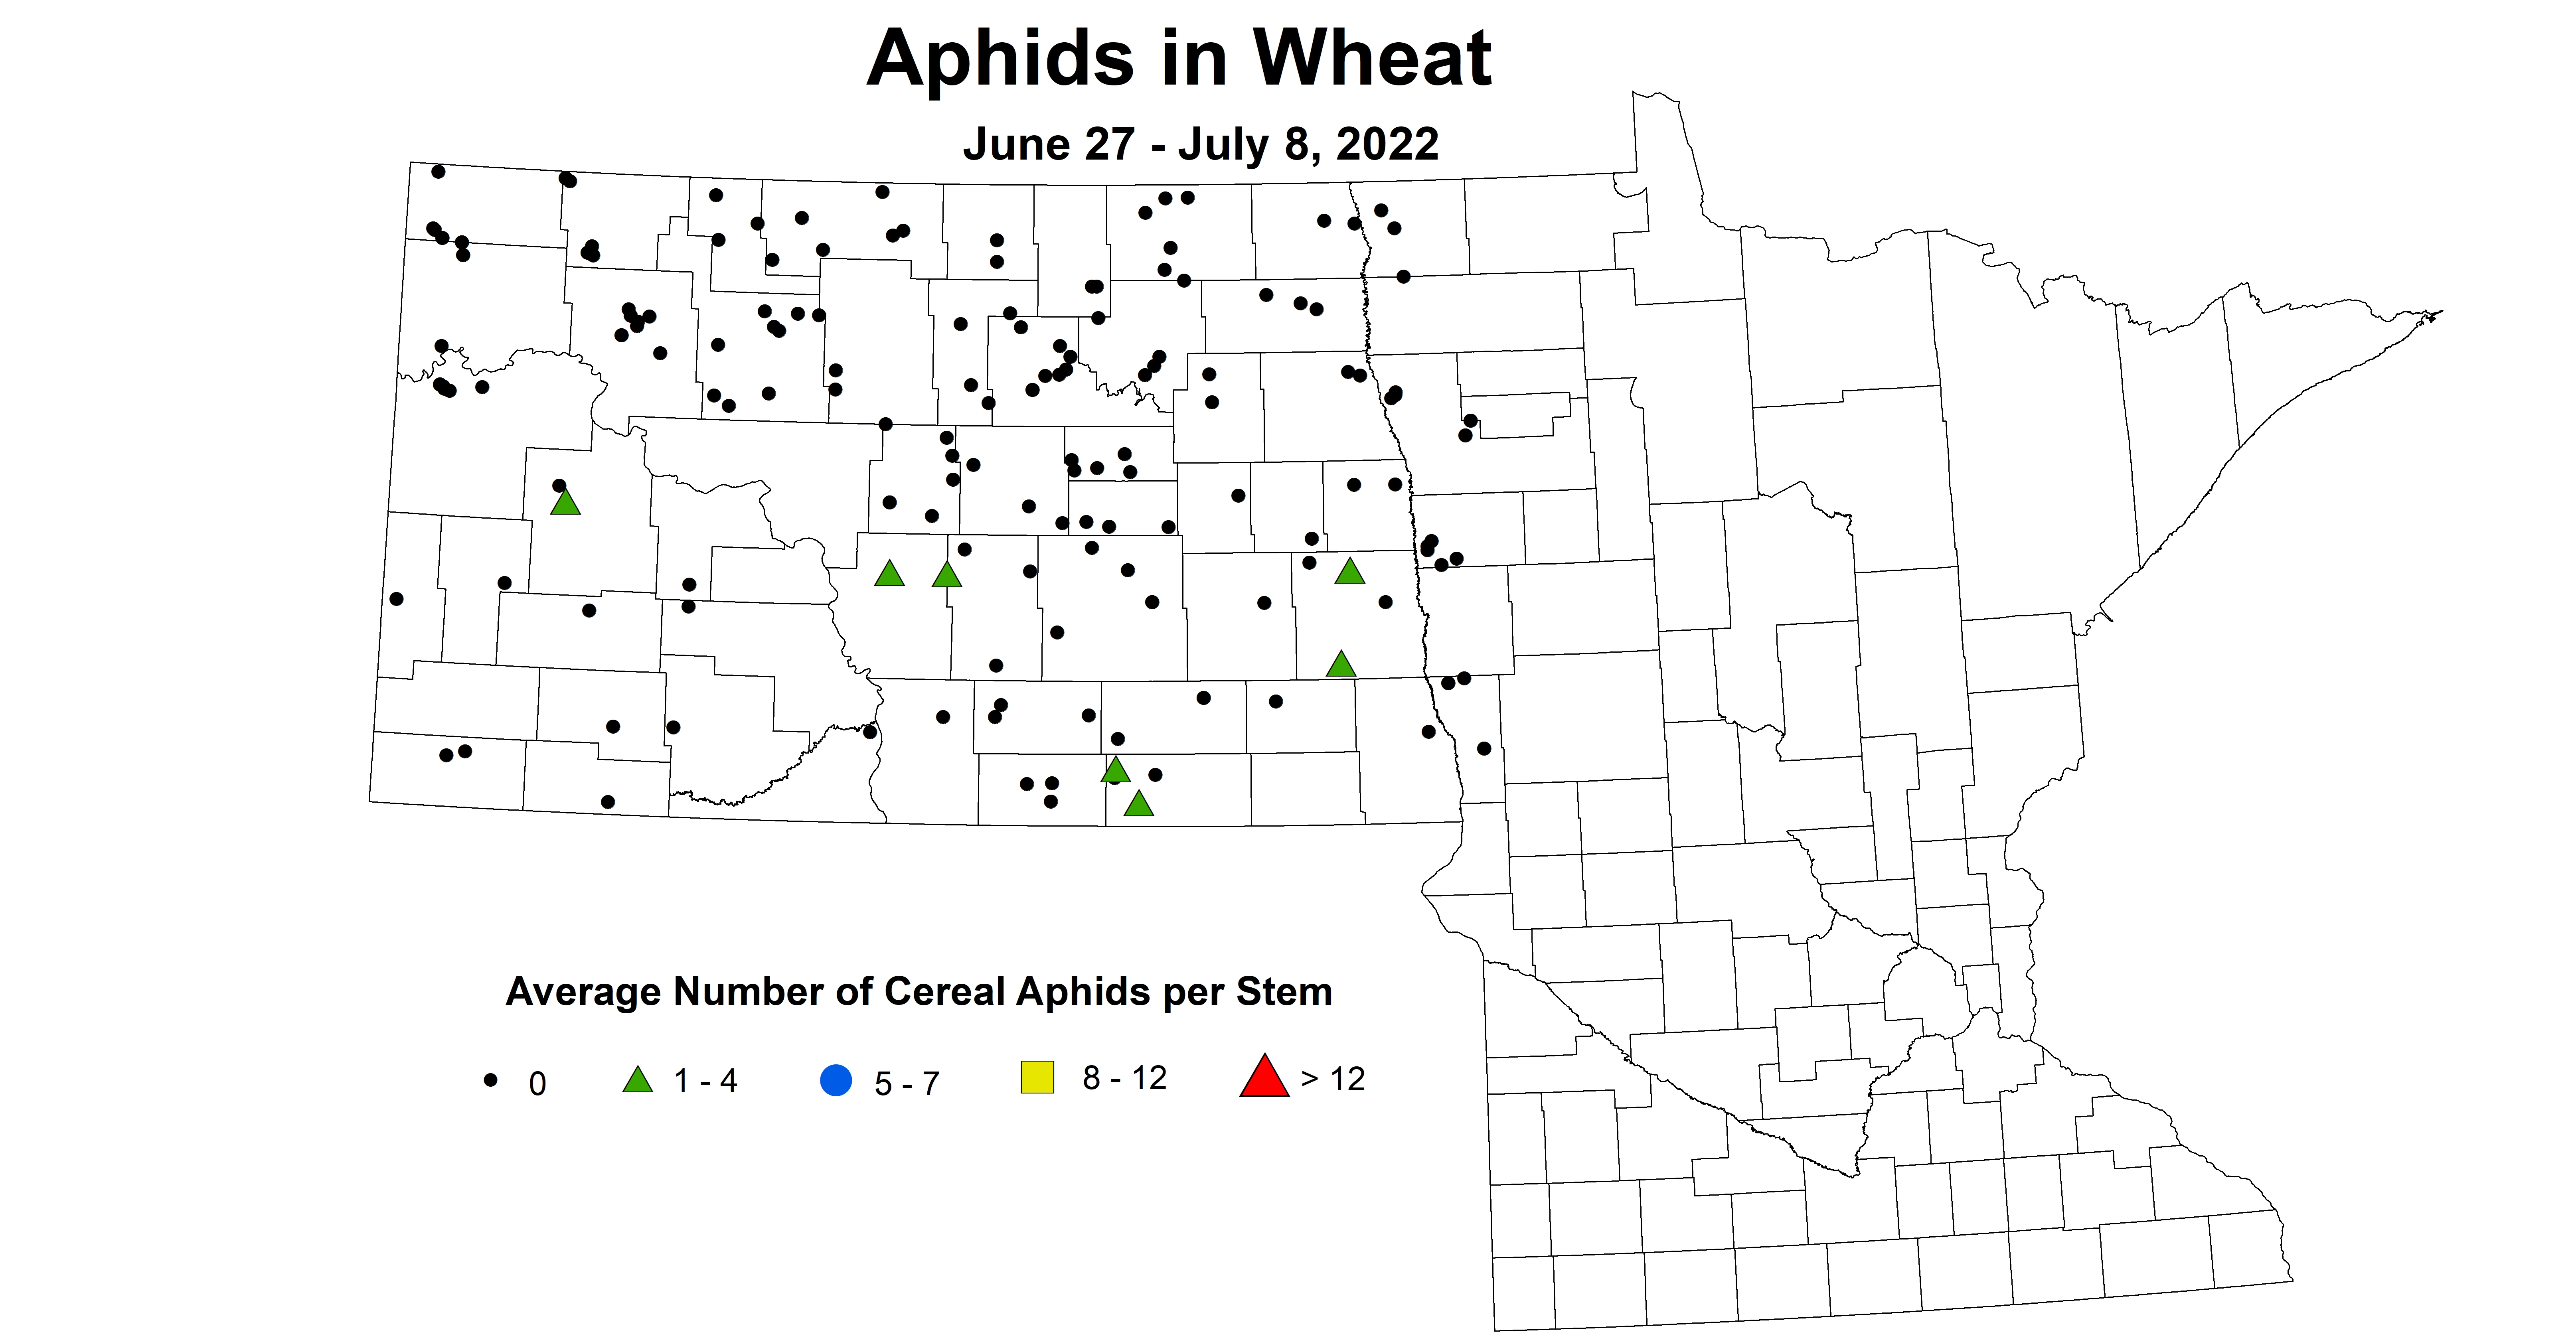 ND IPM map of wheat aphids June 27 to July 8, 2022